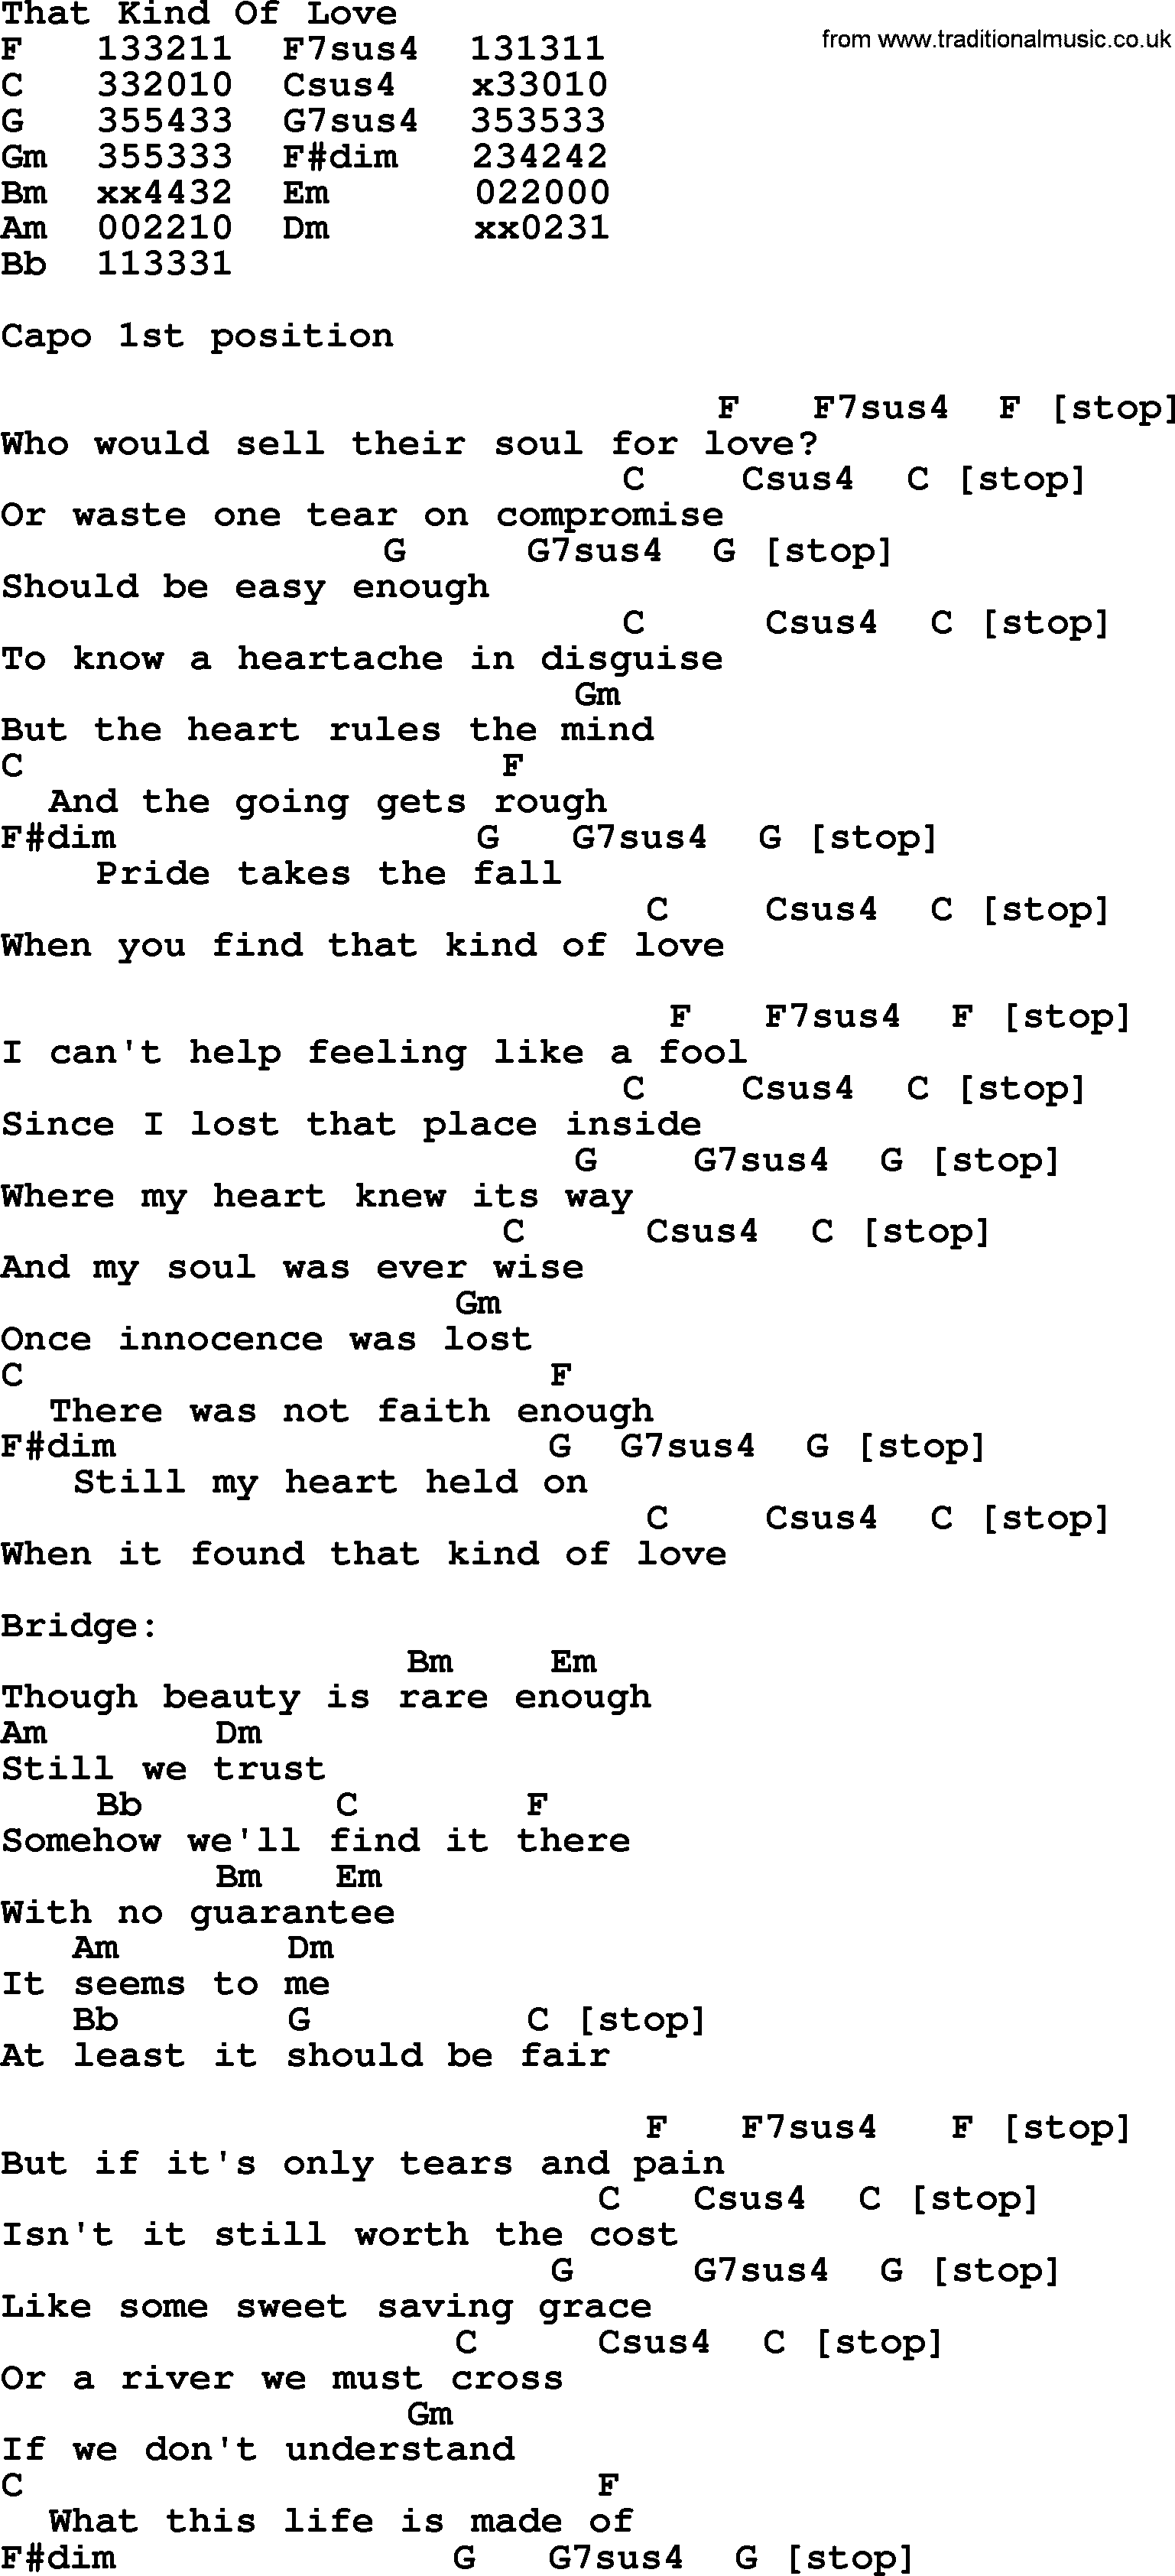 Bluegrass song: That Kind Of Love, lyrics and chords